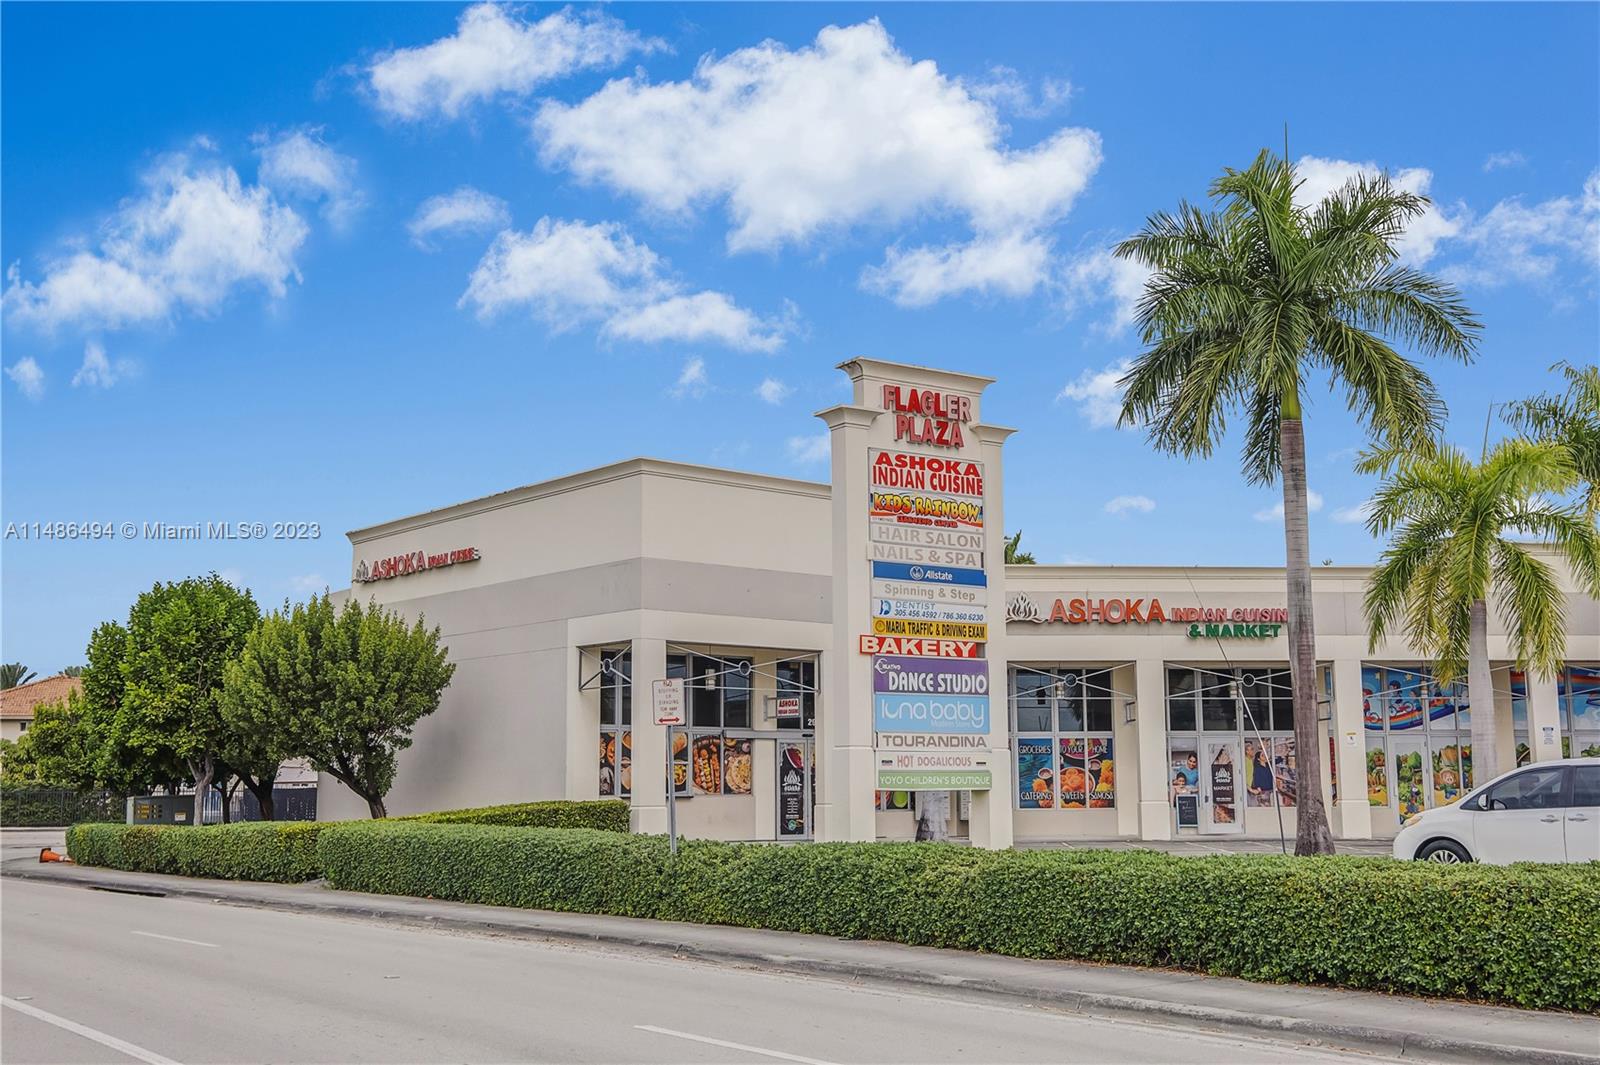 275 NW 82 AVE, Miami, Florida 33126, ,Businessopportunity,For Sale,275 NW 82 AVE,A11486494